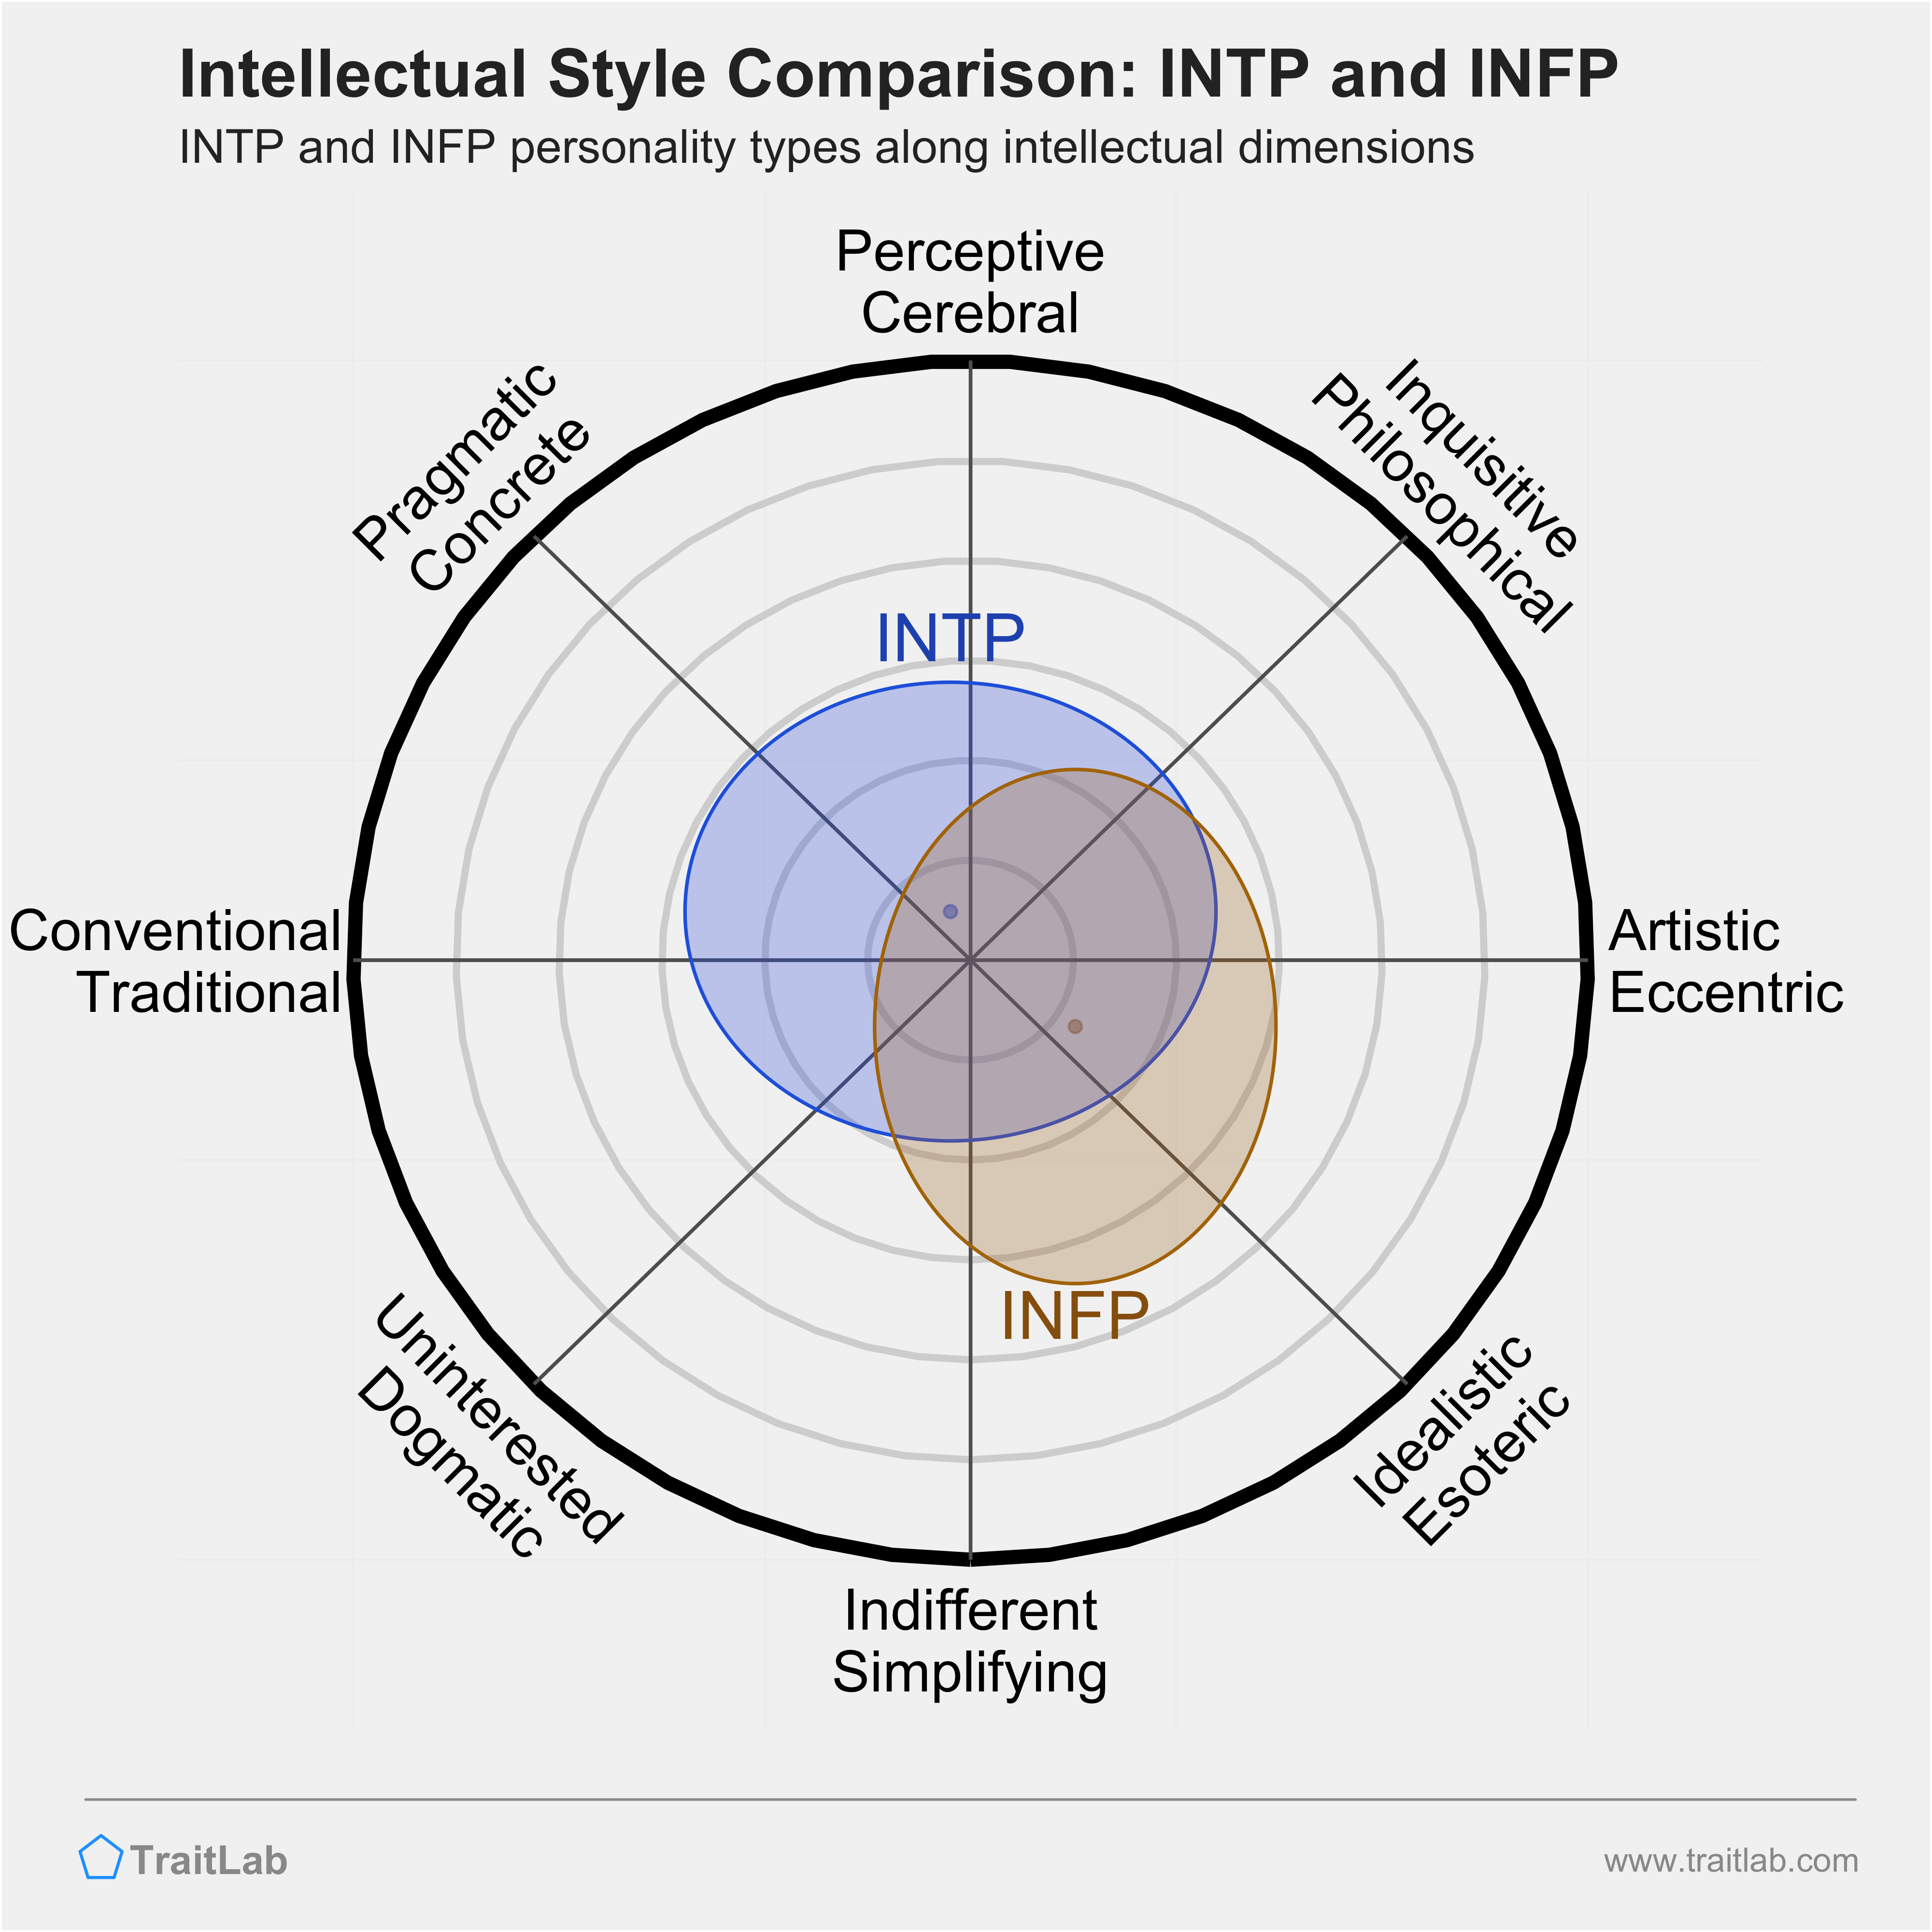 INTP and INFP comparison across intellectual dimensions